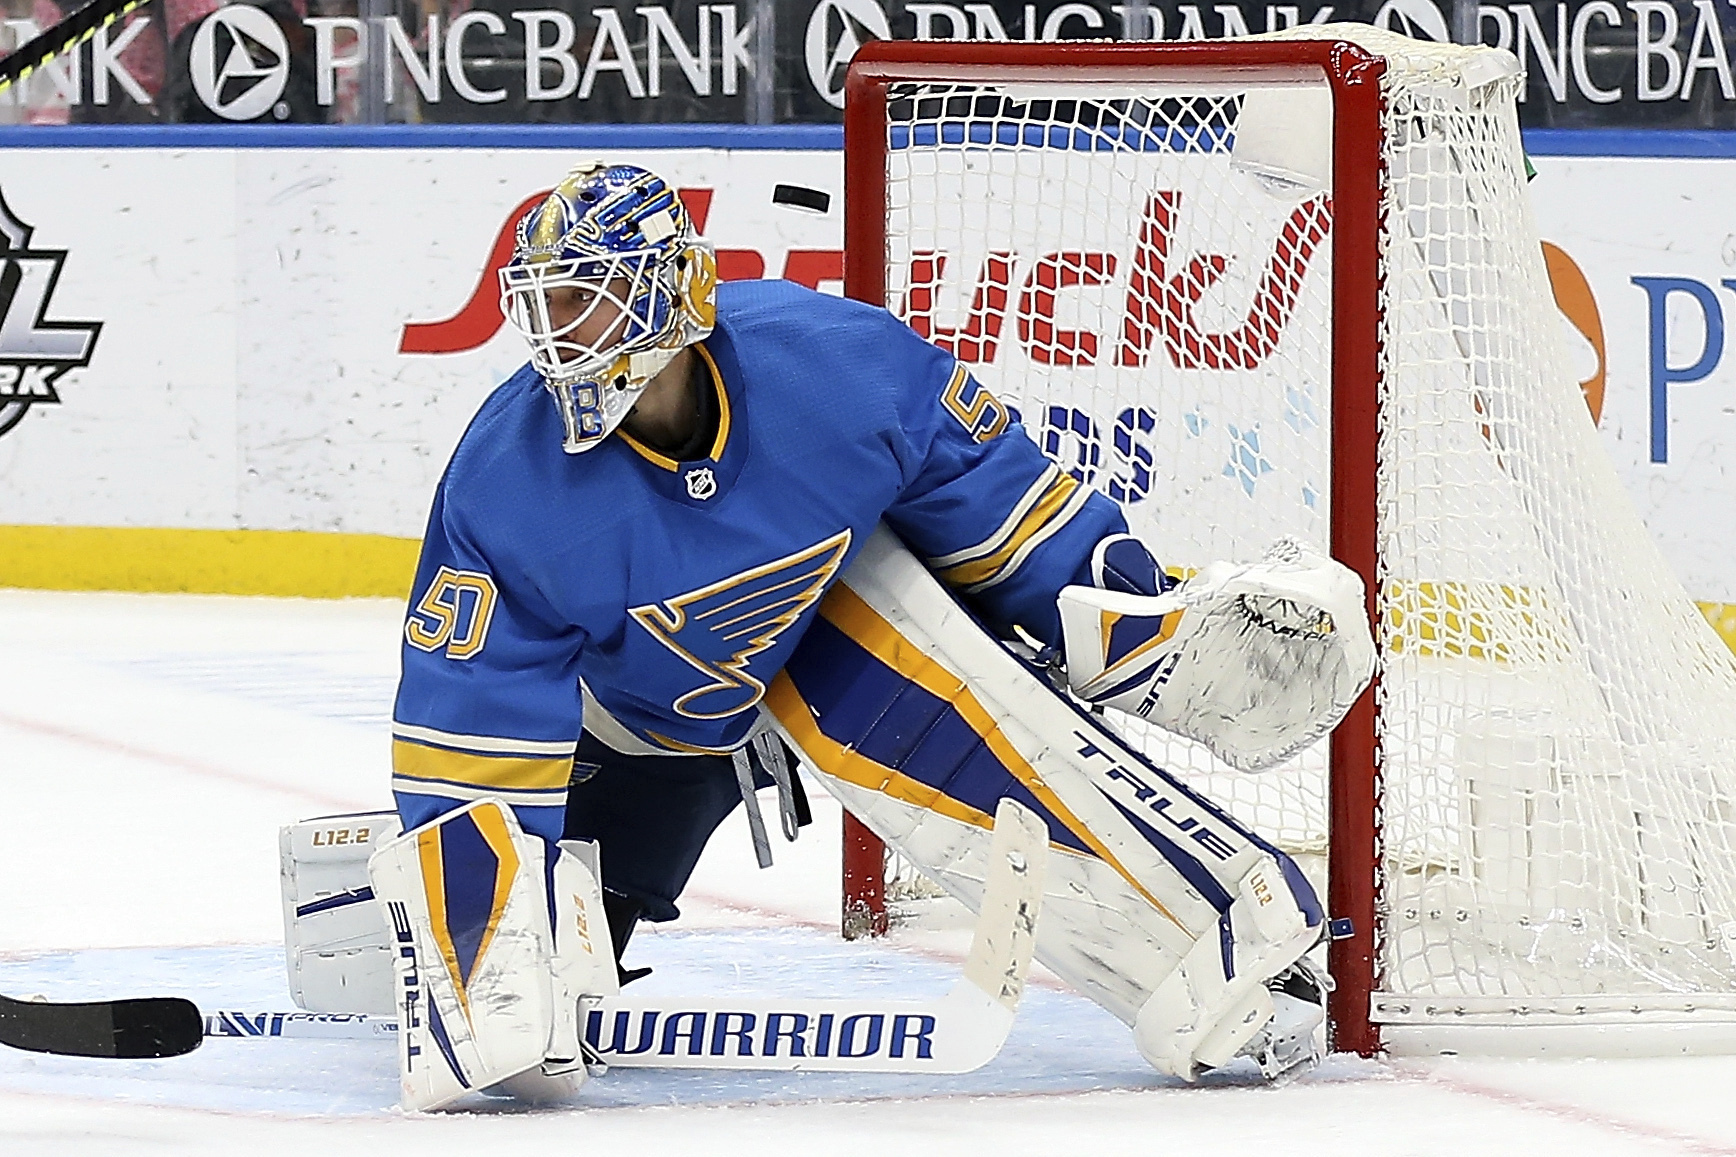 i gang slidbane anklageren Jordan Binnington, Blues Agree to 6-Year, $36M Contract Extension |  Bleacher Report | Latest News, Videos and Highlights